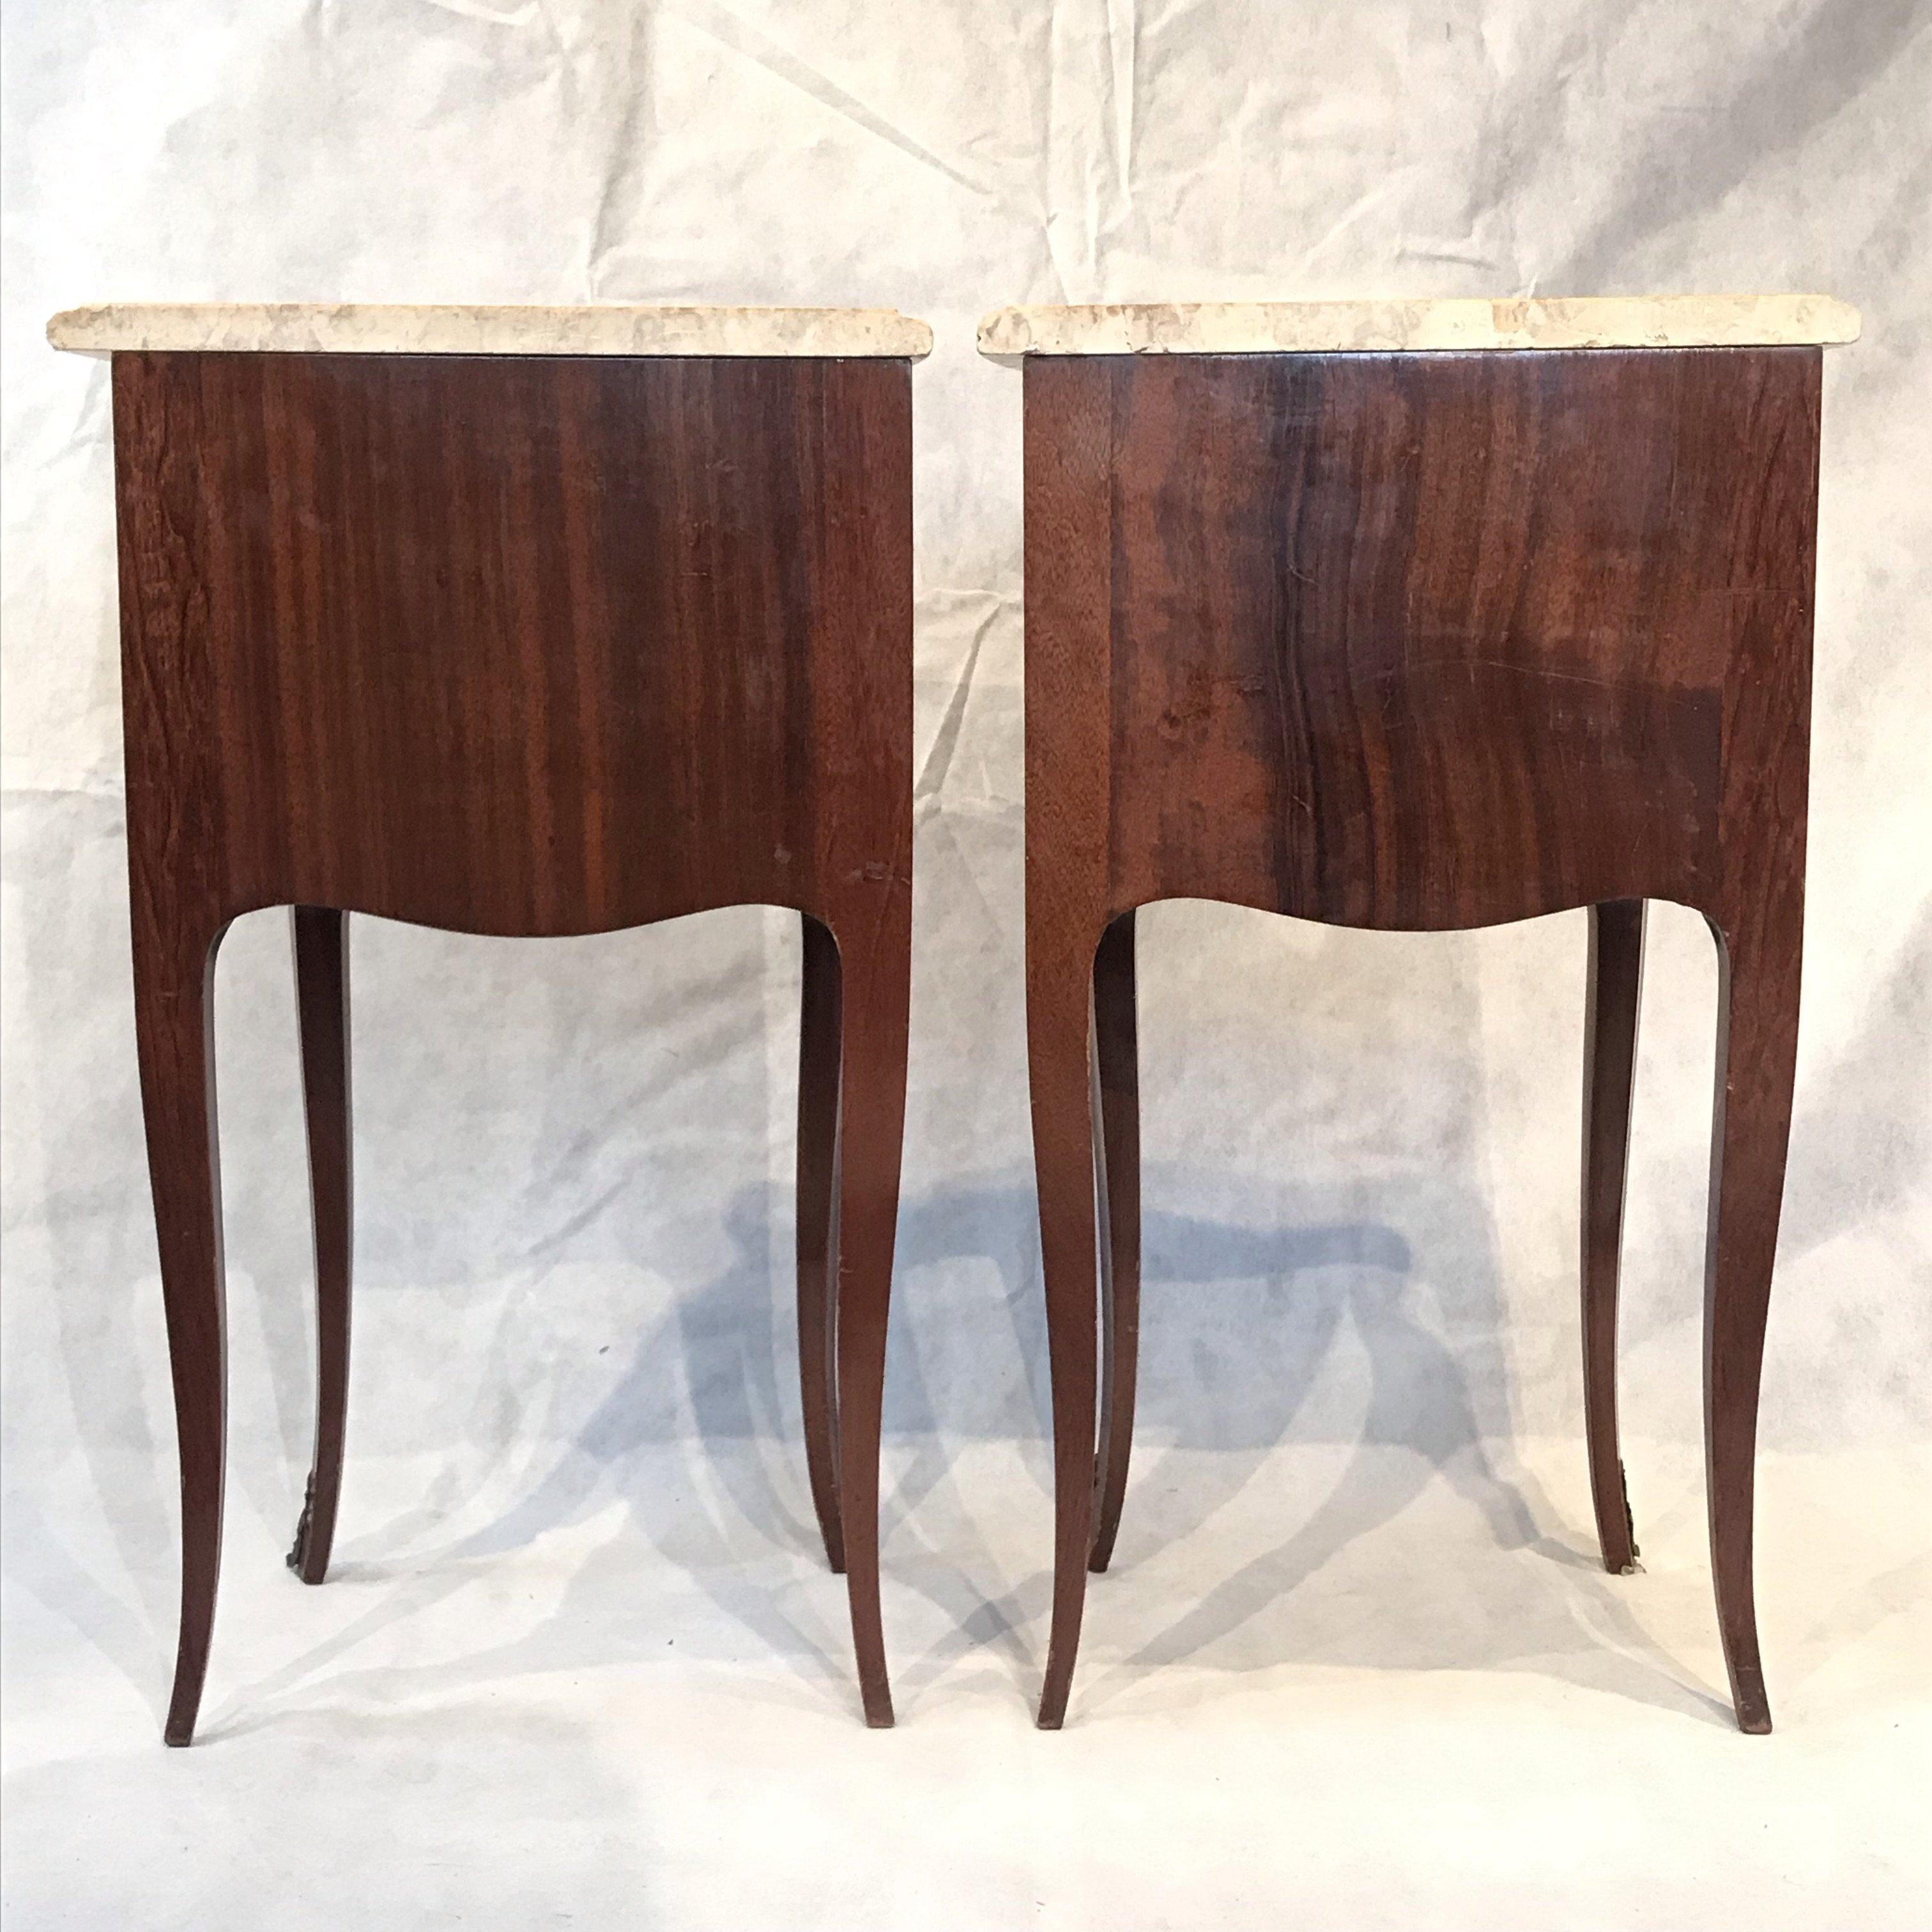 Lovely Pair of French Inlaid Kingwood Nightstands with Marble Tops 6